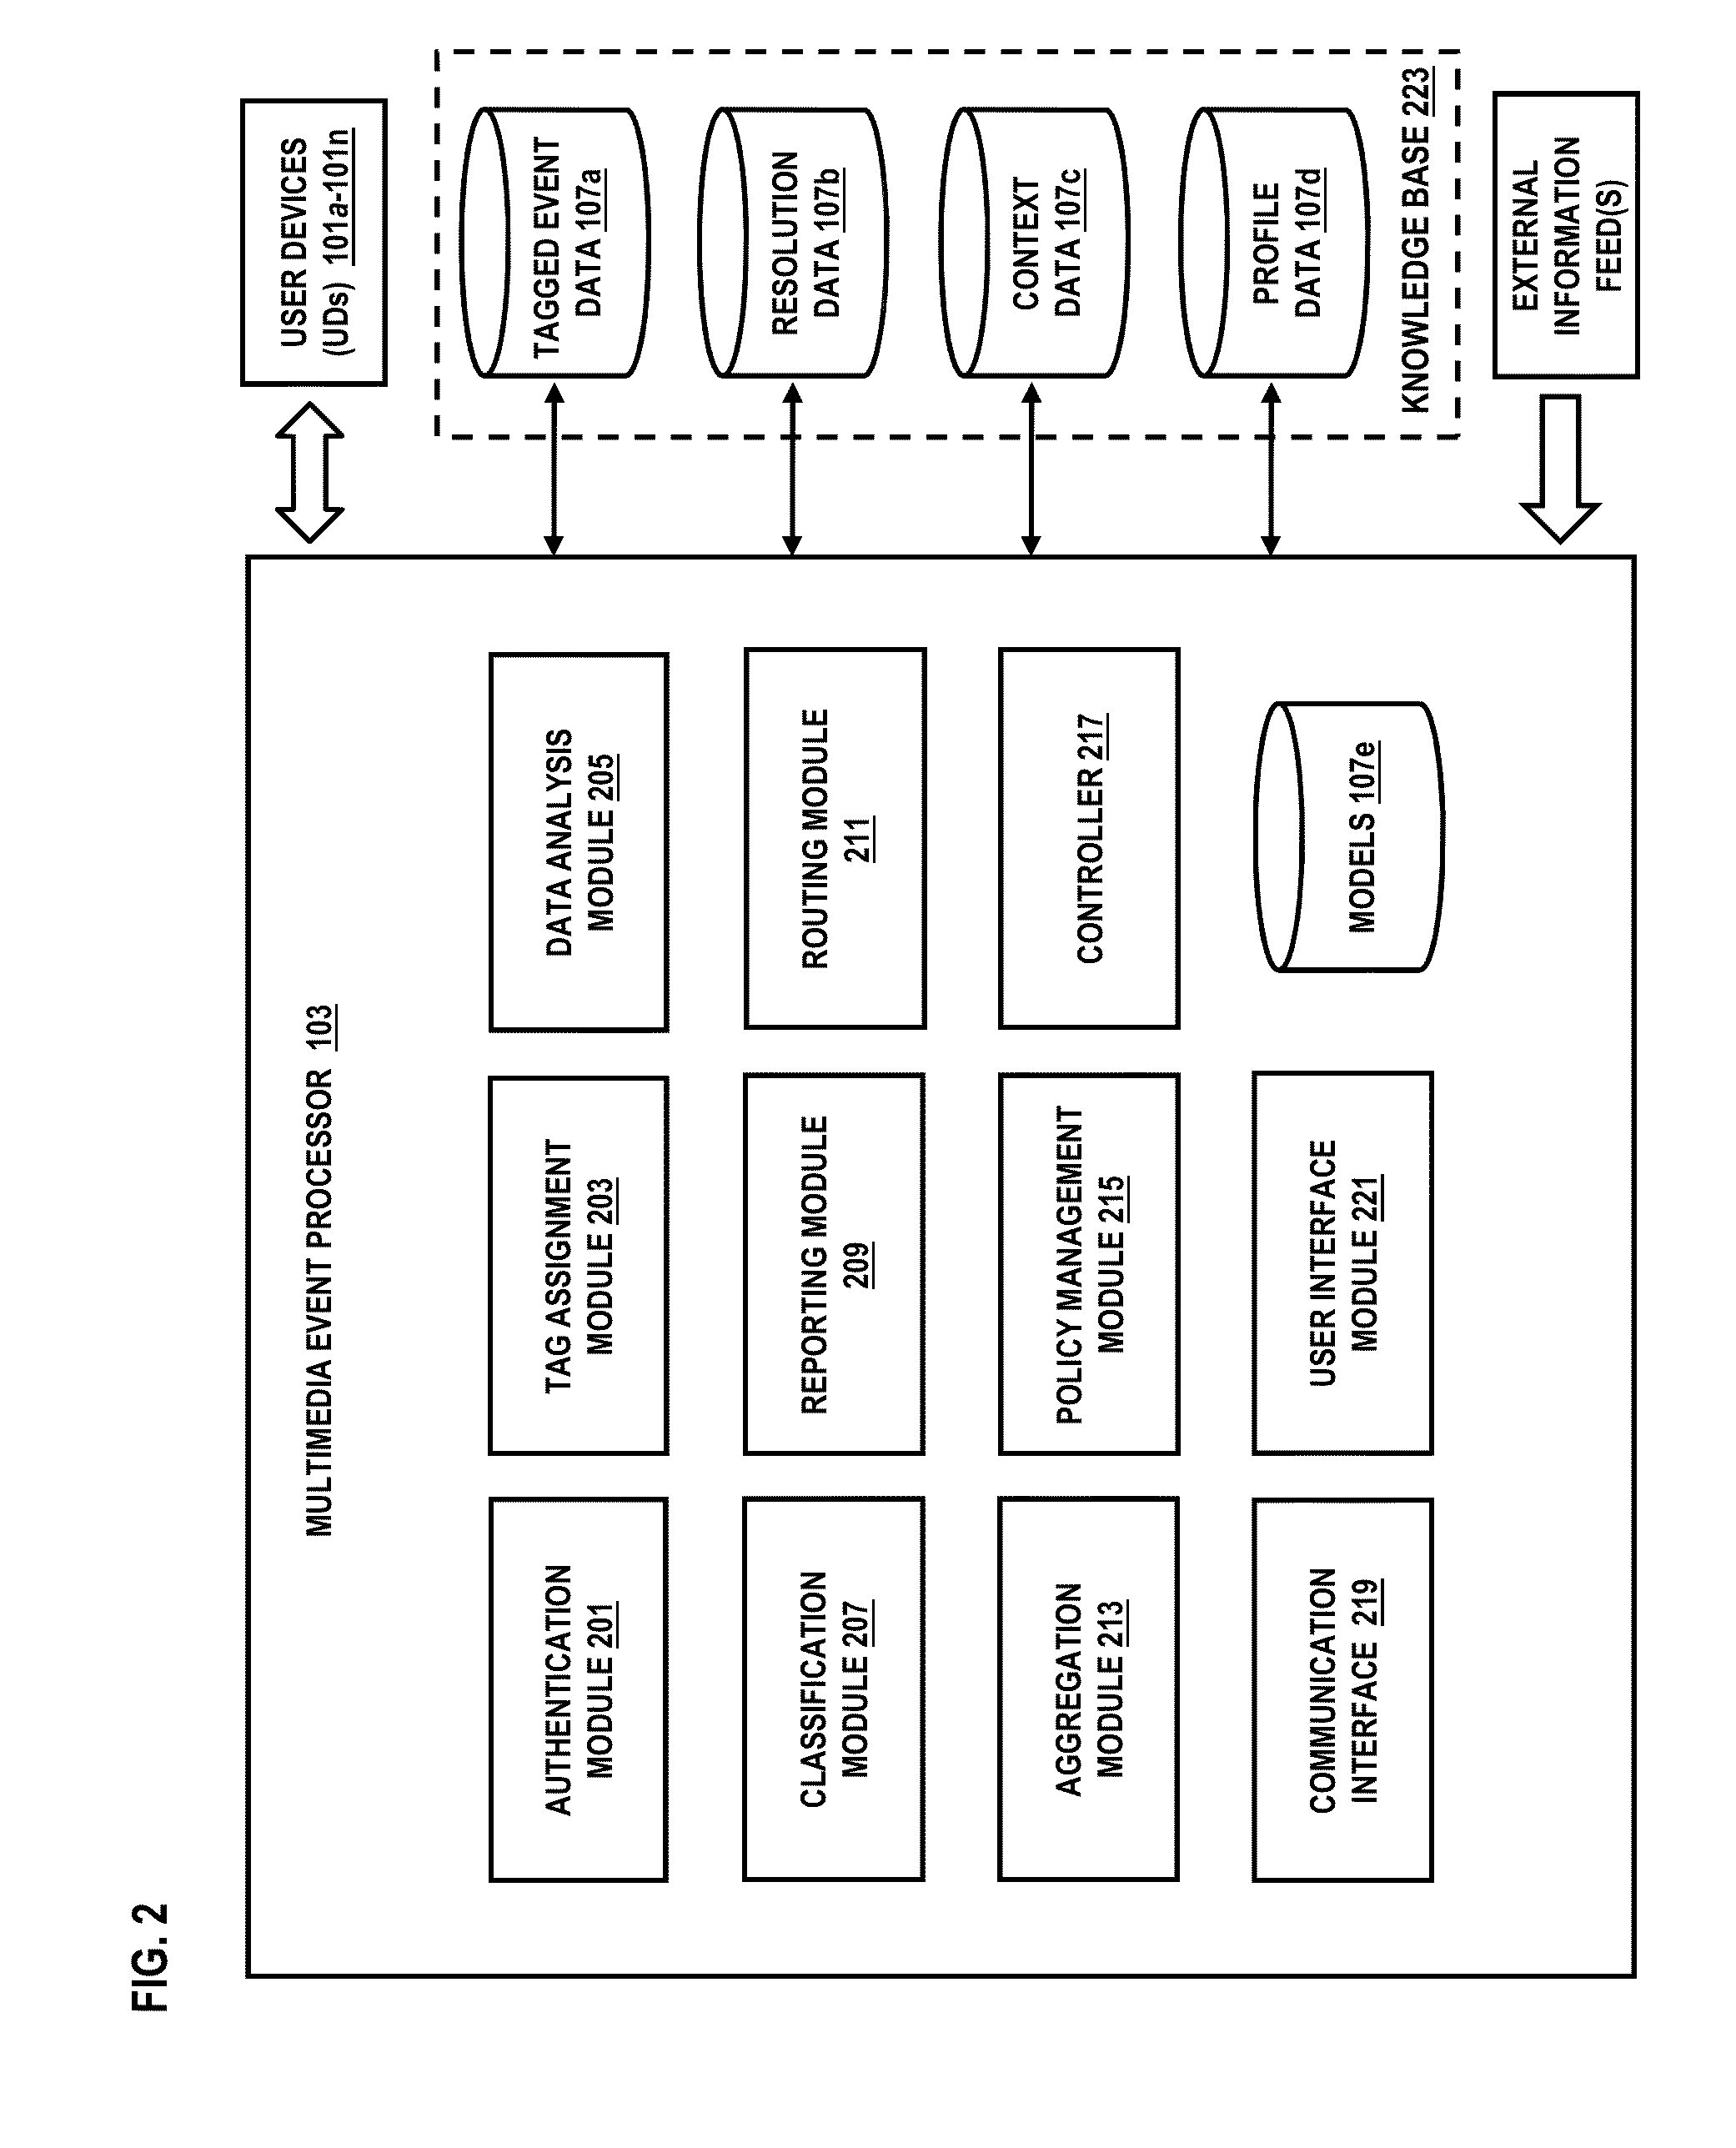 Method and system for generating emergency notifications based on aggregate event data